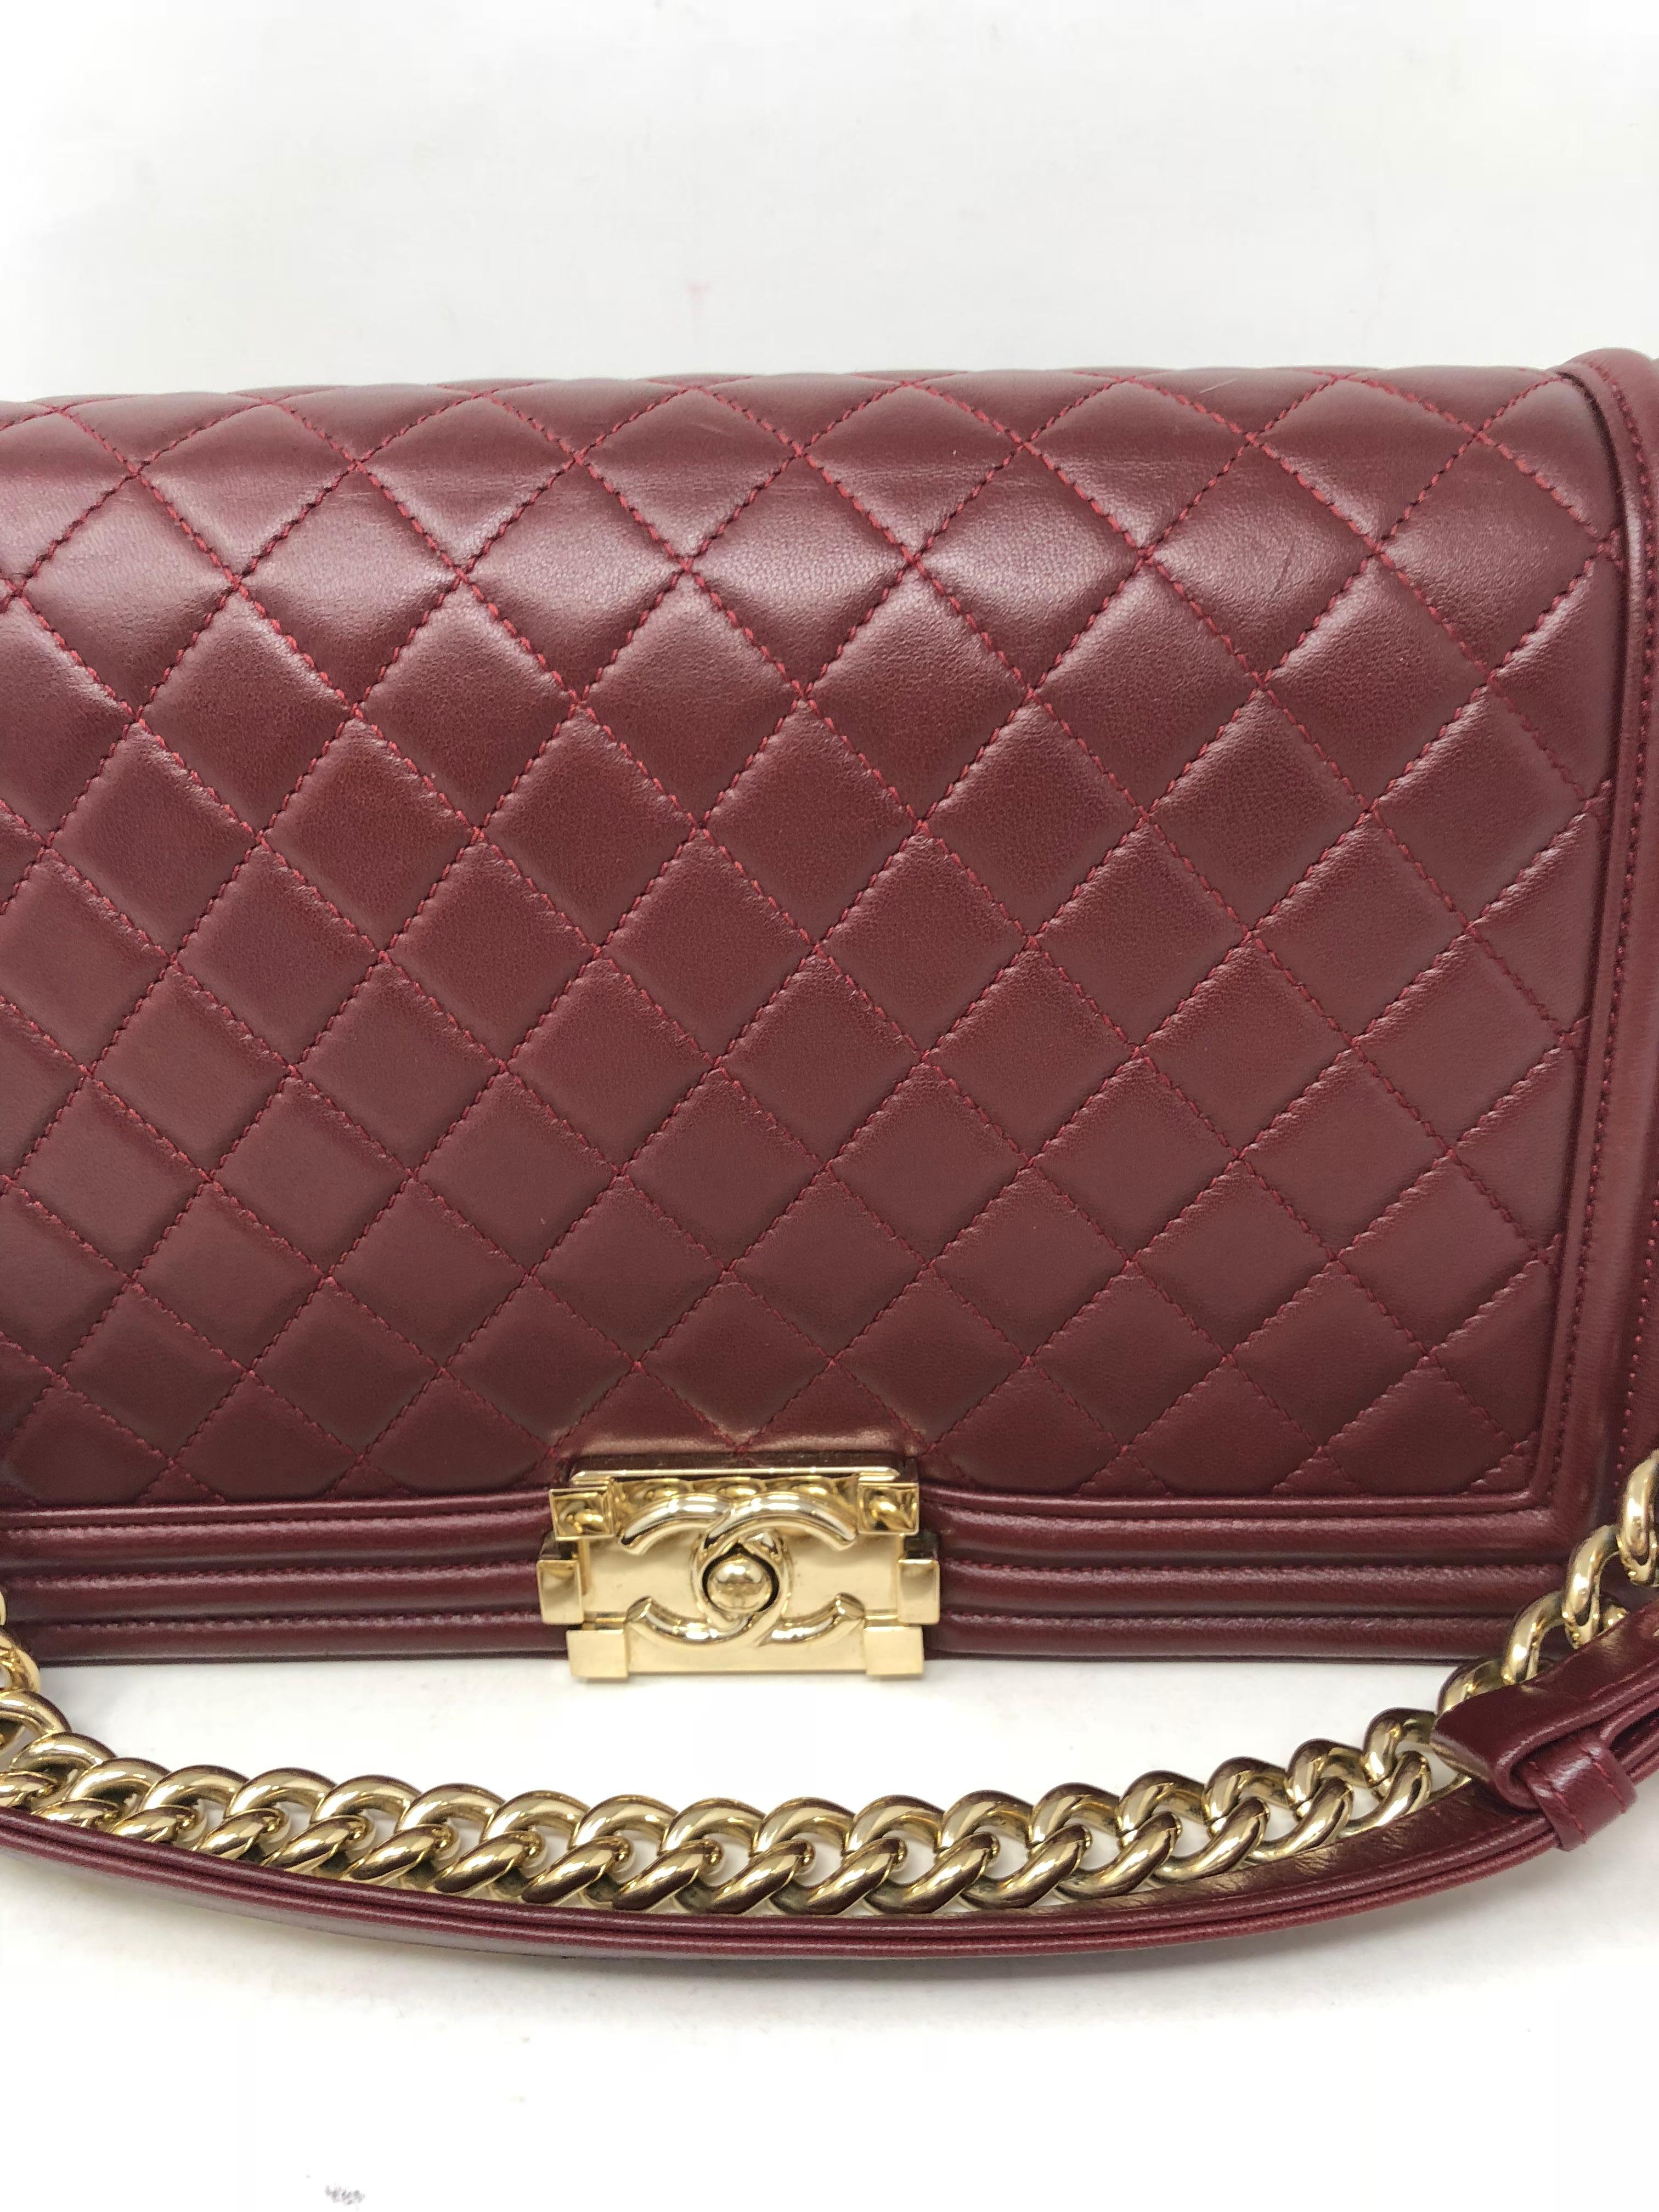 Chanel Burgundy Boy Bag with gold hardware. Great condition bag. Hardware and chain like new still very shiny gold. Lambskin smooth leather in good condition. Bag can be worn as a crossbody or shorter. Stunning and rare color. Boy Bags are classics.